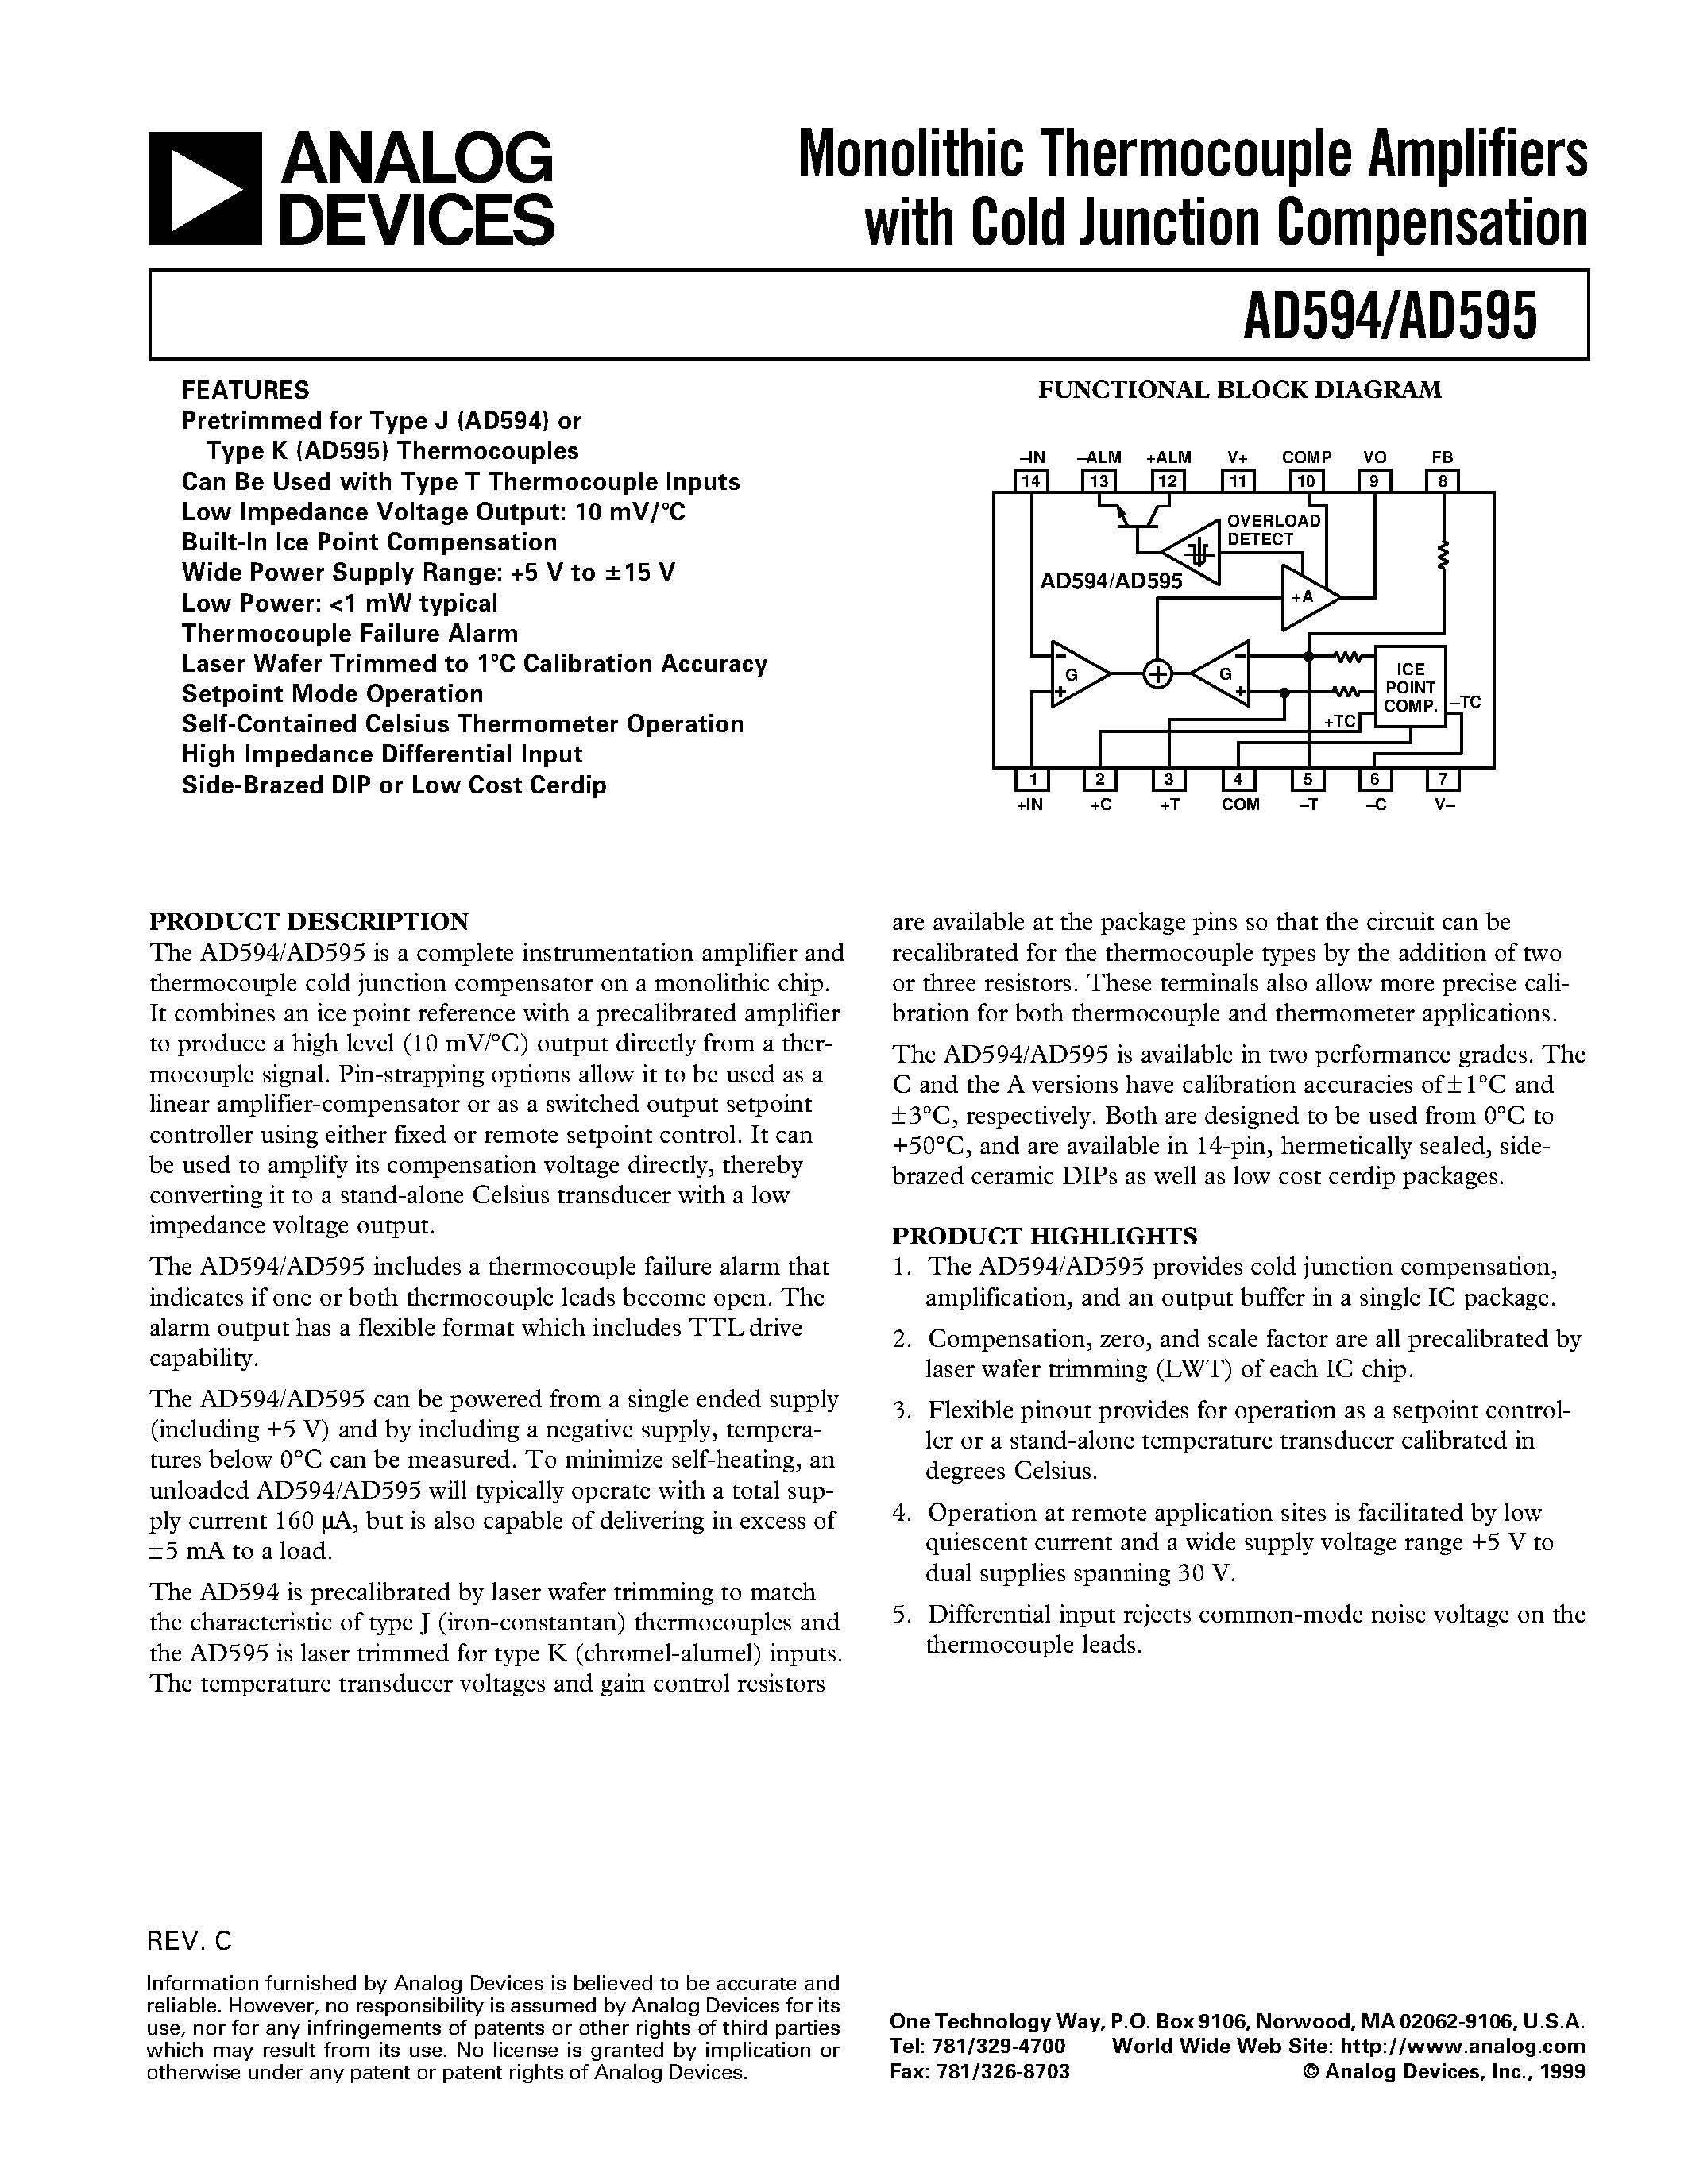 Datasheet AD594CD - Monolithic Thermocouple Amplifiers with Cold Junction Compensation page 1